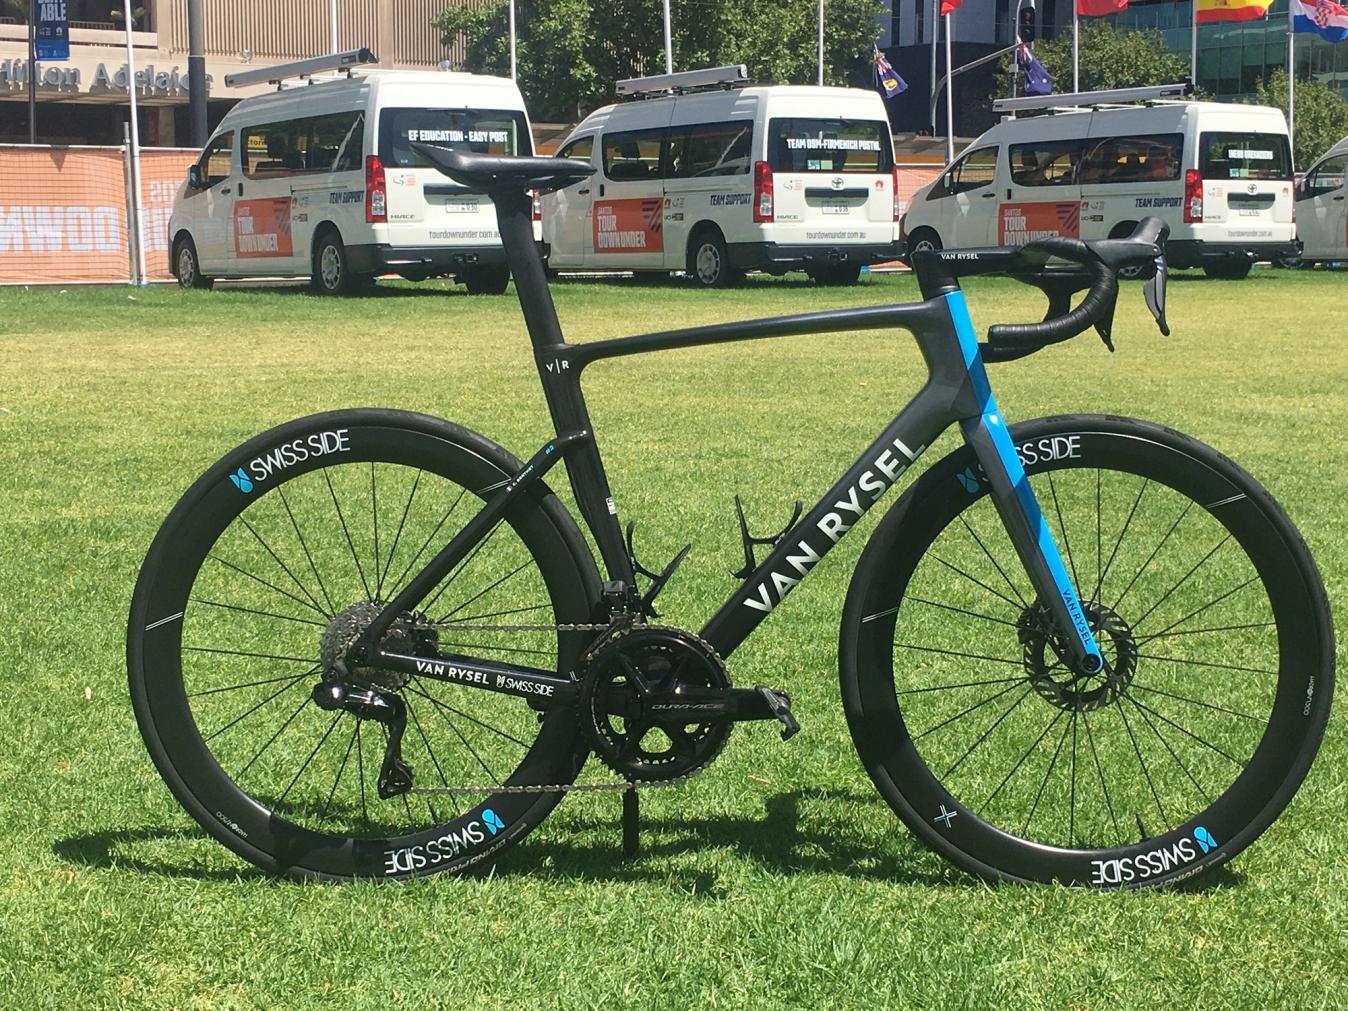 There's a new bike brand in the WorldTour peloton in the form of Van Rysel